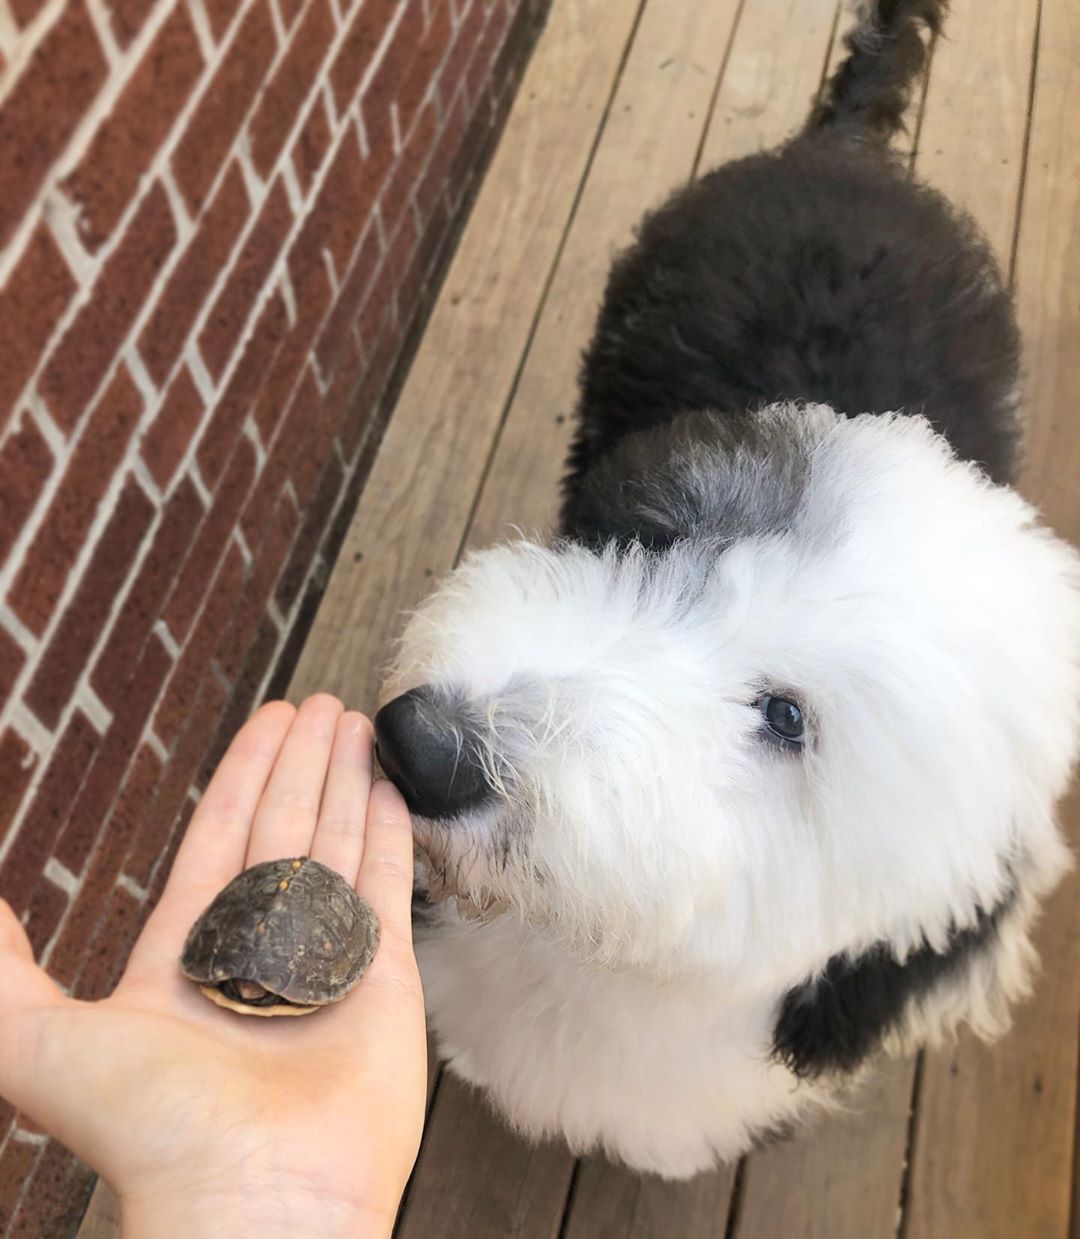 A Old English Sheepdog standing on the wooden floor while smelling the little turtle in the hand of a woman